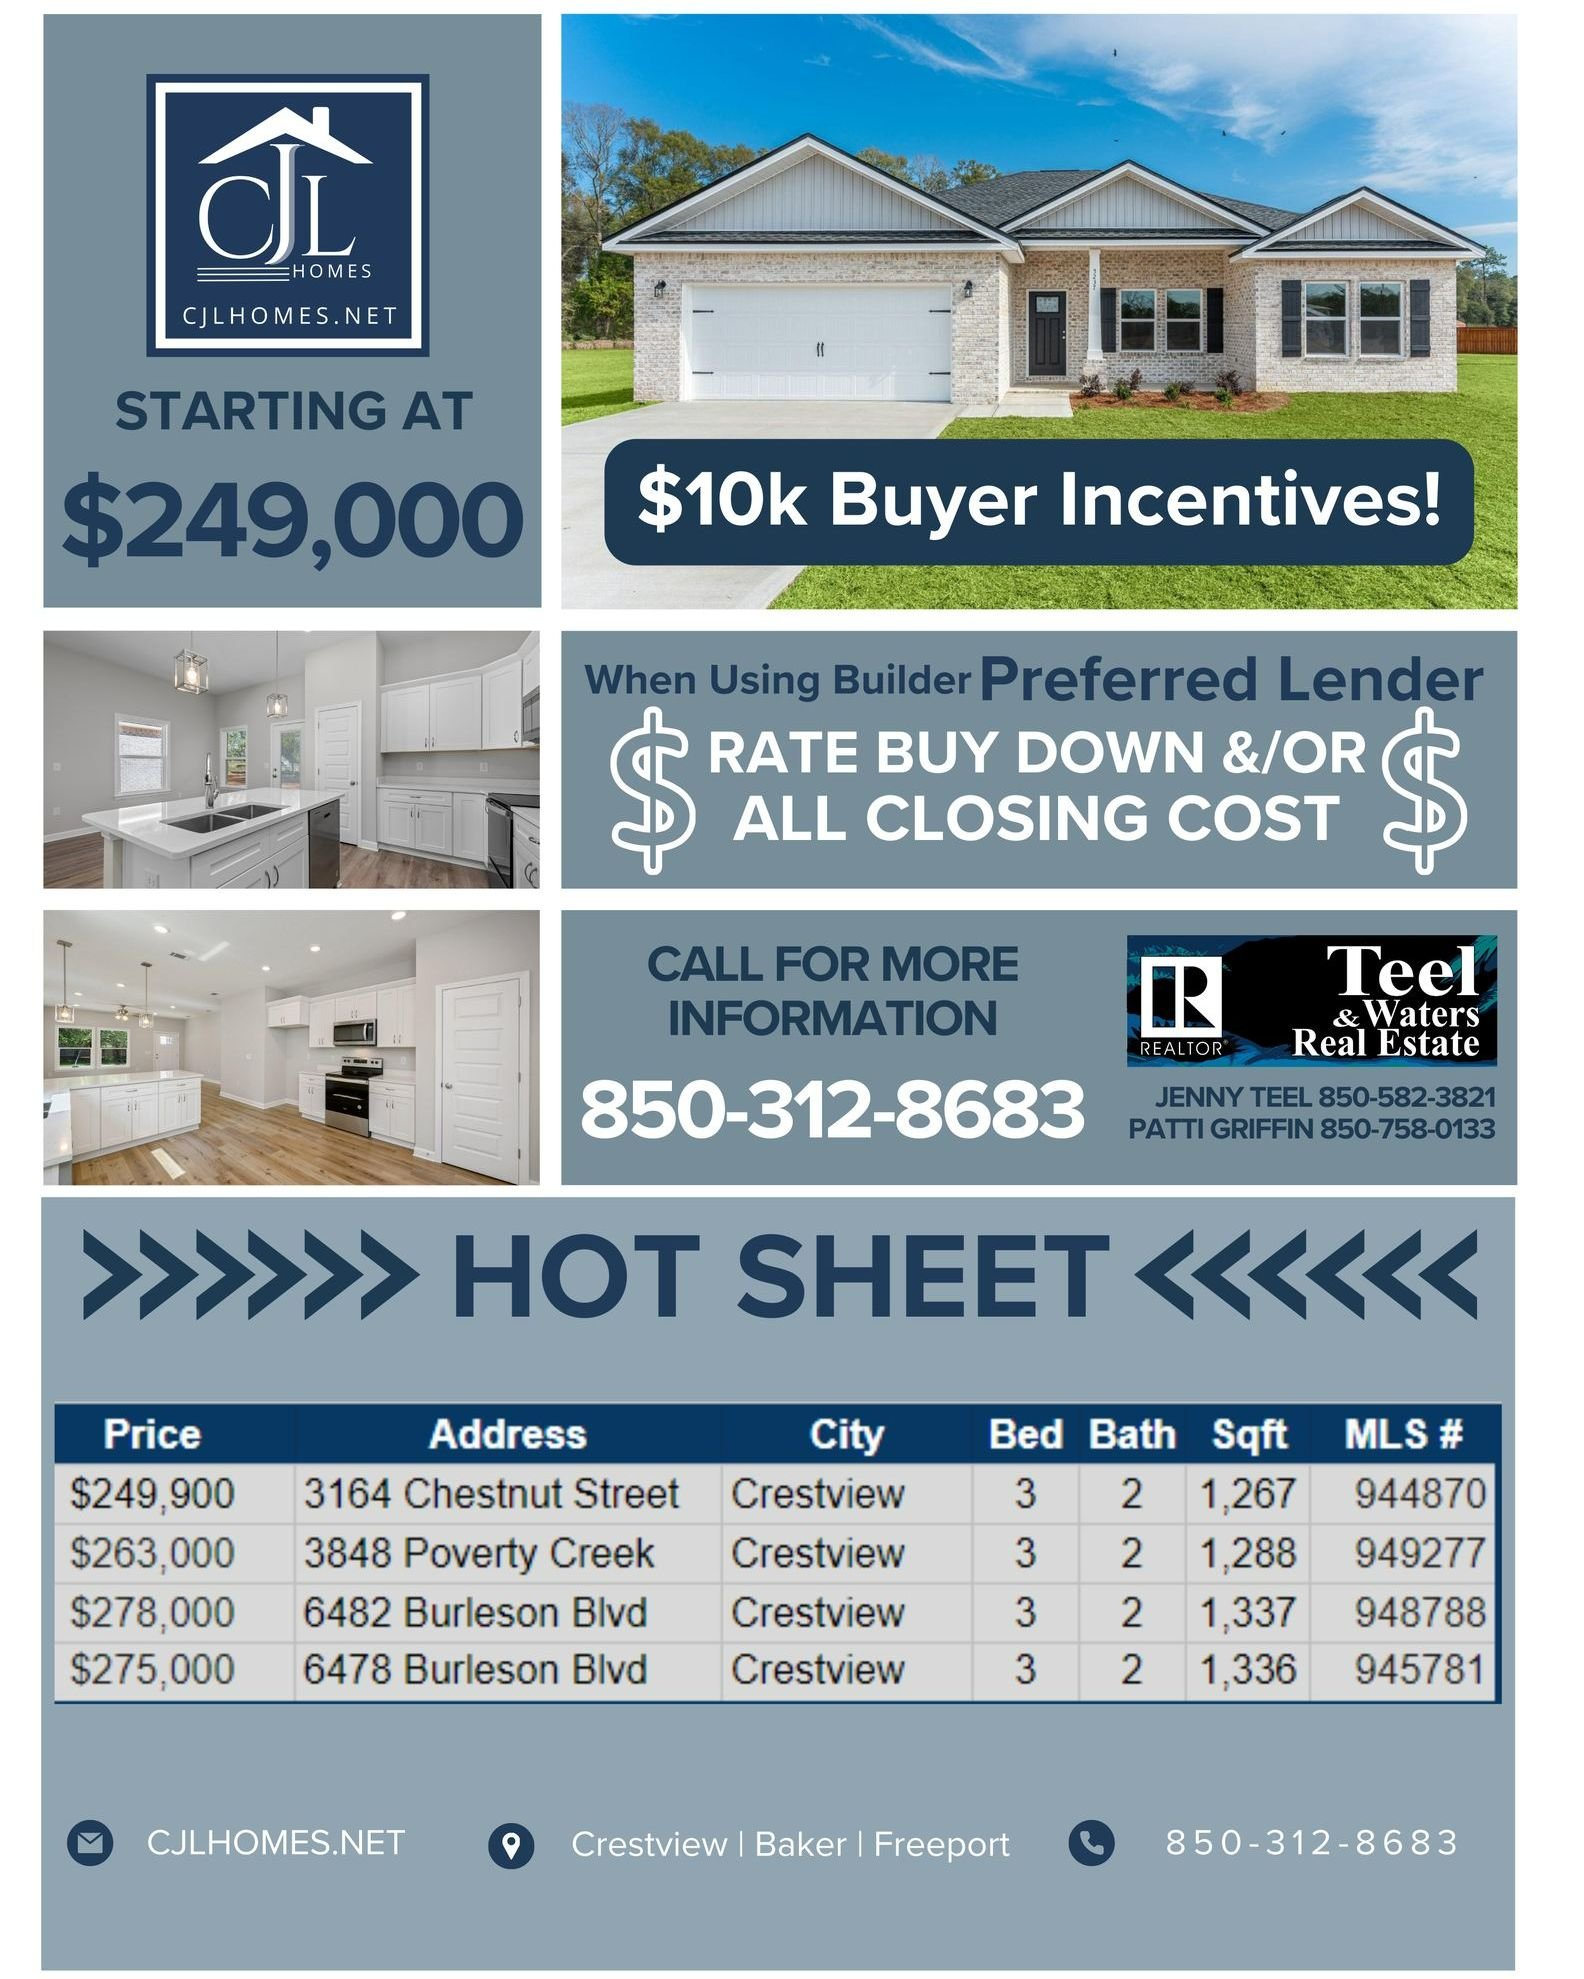 🔥🏠 **Hot Deal Alert from CJL Homes!** 🏠🔥

Looking for your dream home? Starting at just $249,000, our homes in Crestview and Freeport are waiting for you! Plus, enjoy an exclusive buyer incentive: up to $10,000 towards your home purchase! 💰✨

Do